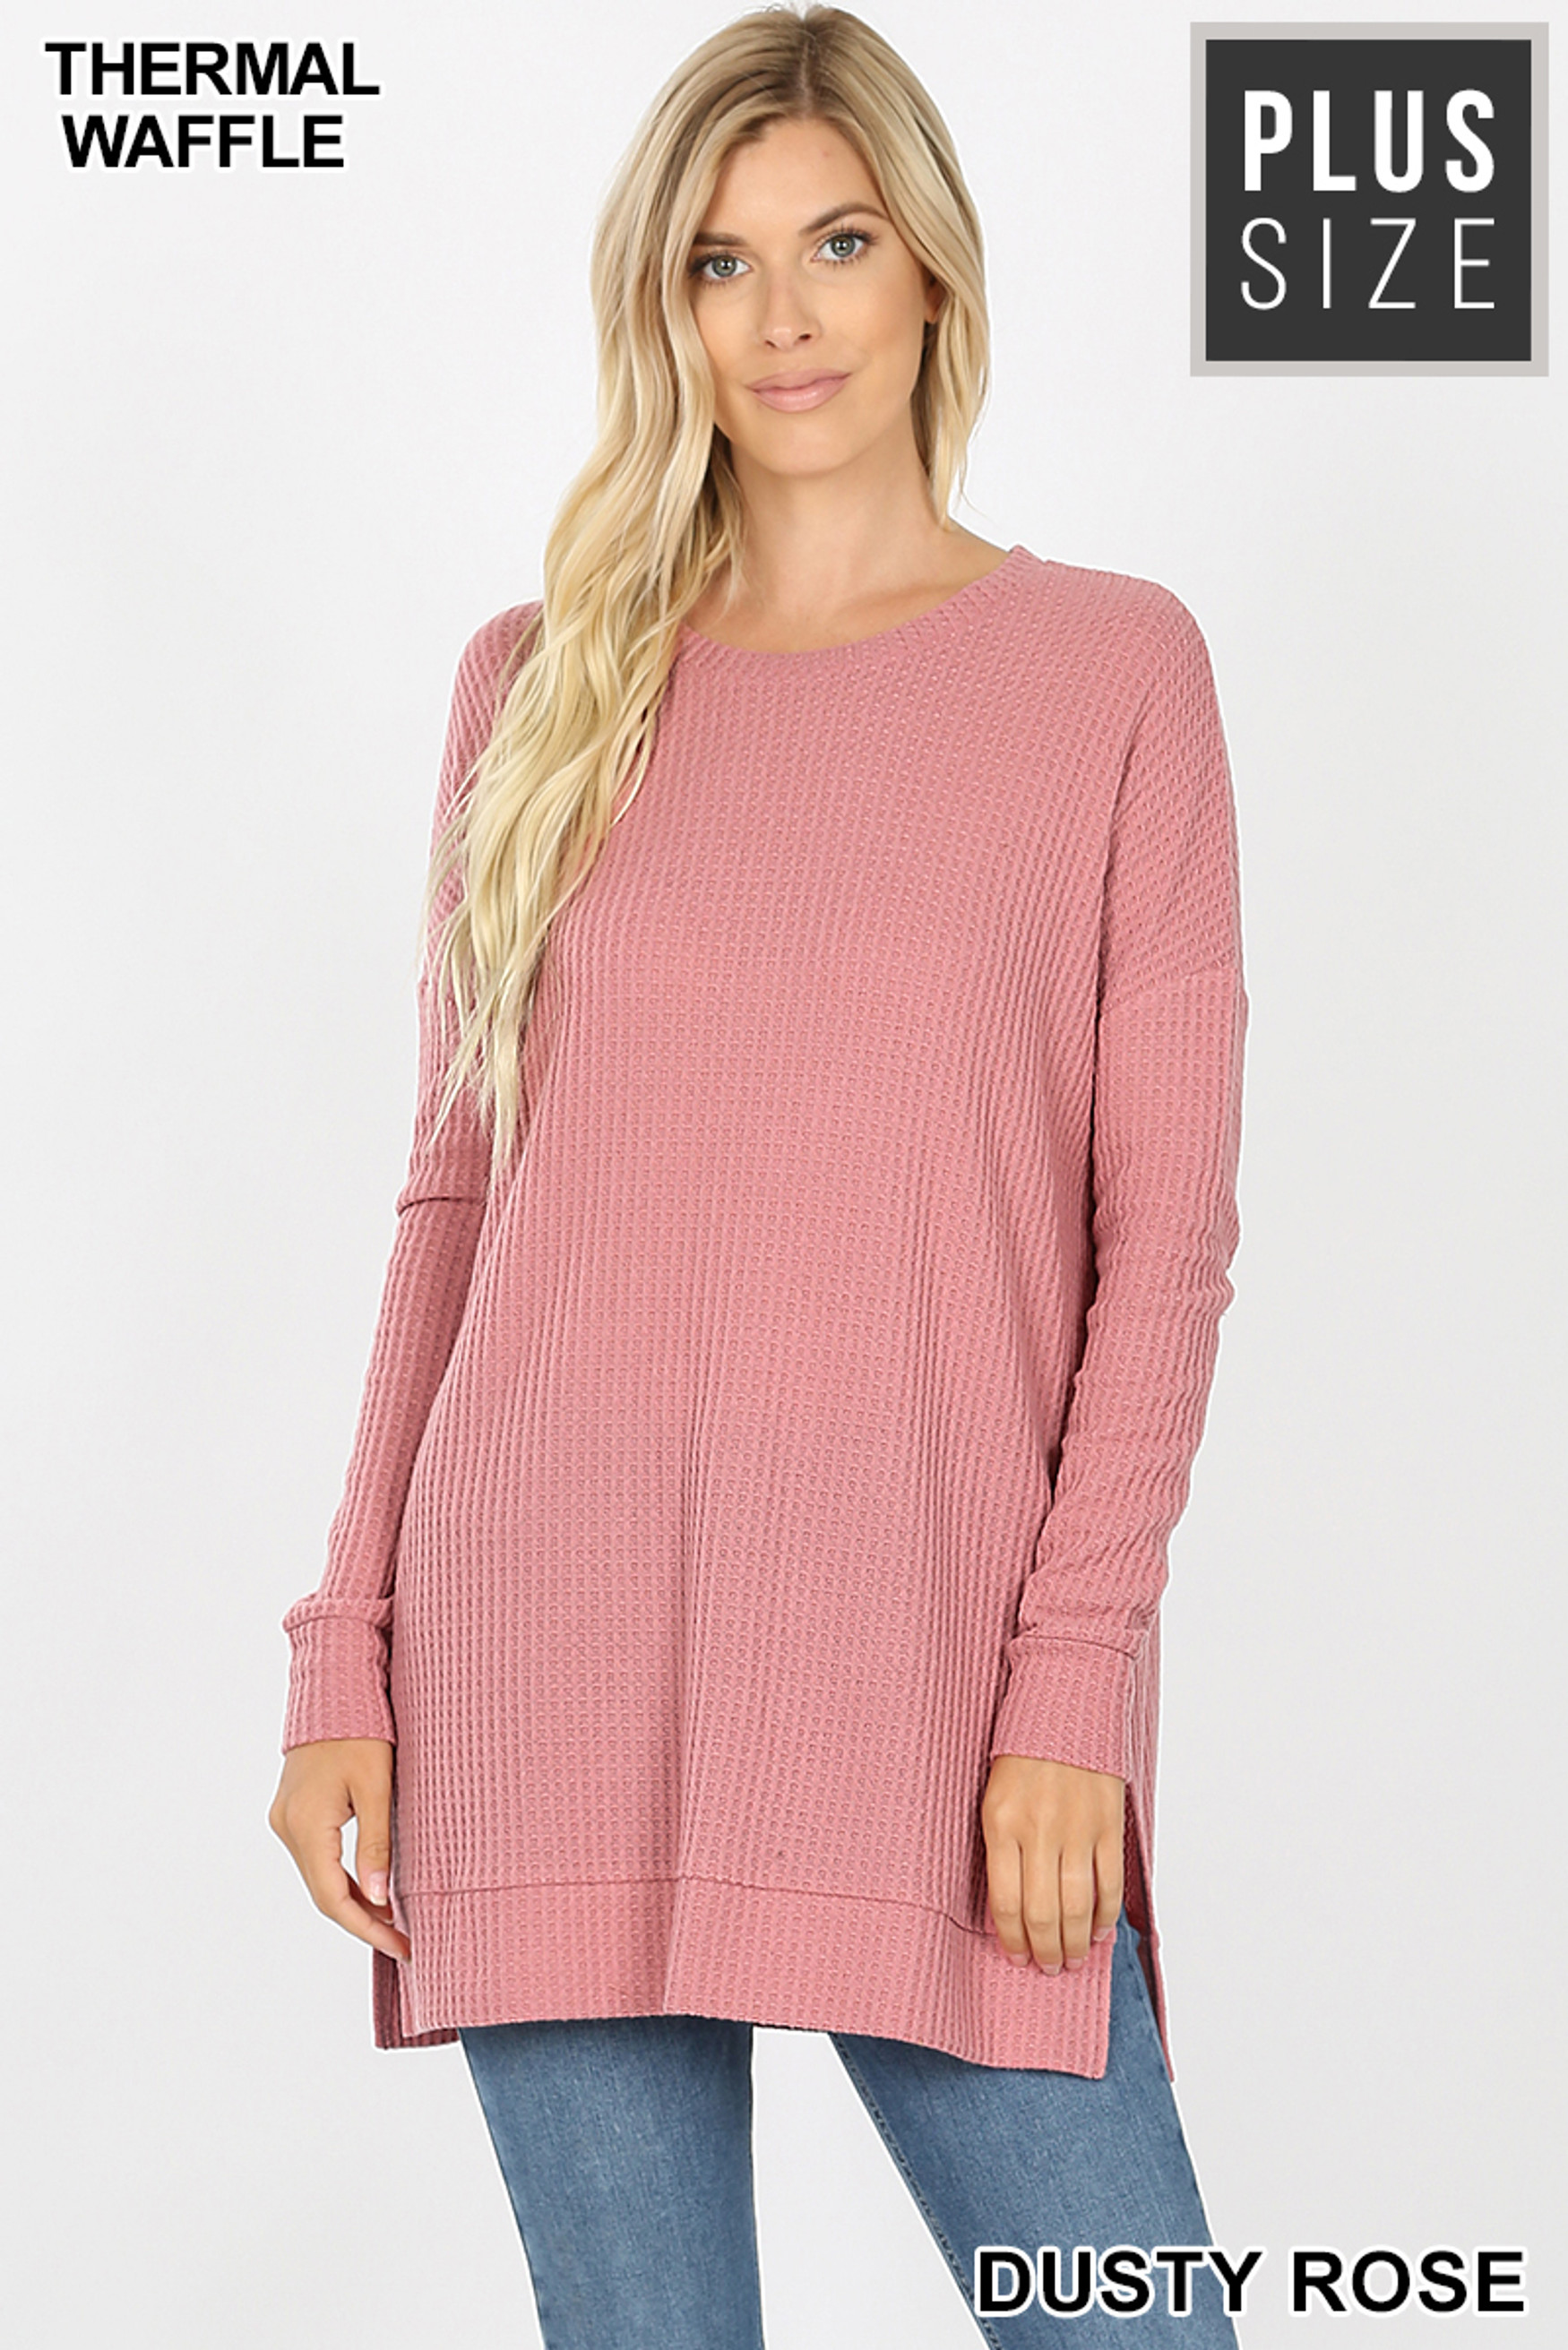 Front image of Dusty Rose Brushed Thermal Waffle Knit Round Neck Plus Size Sweater